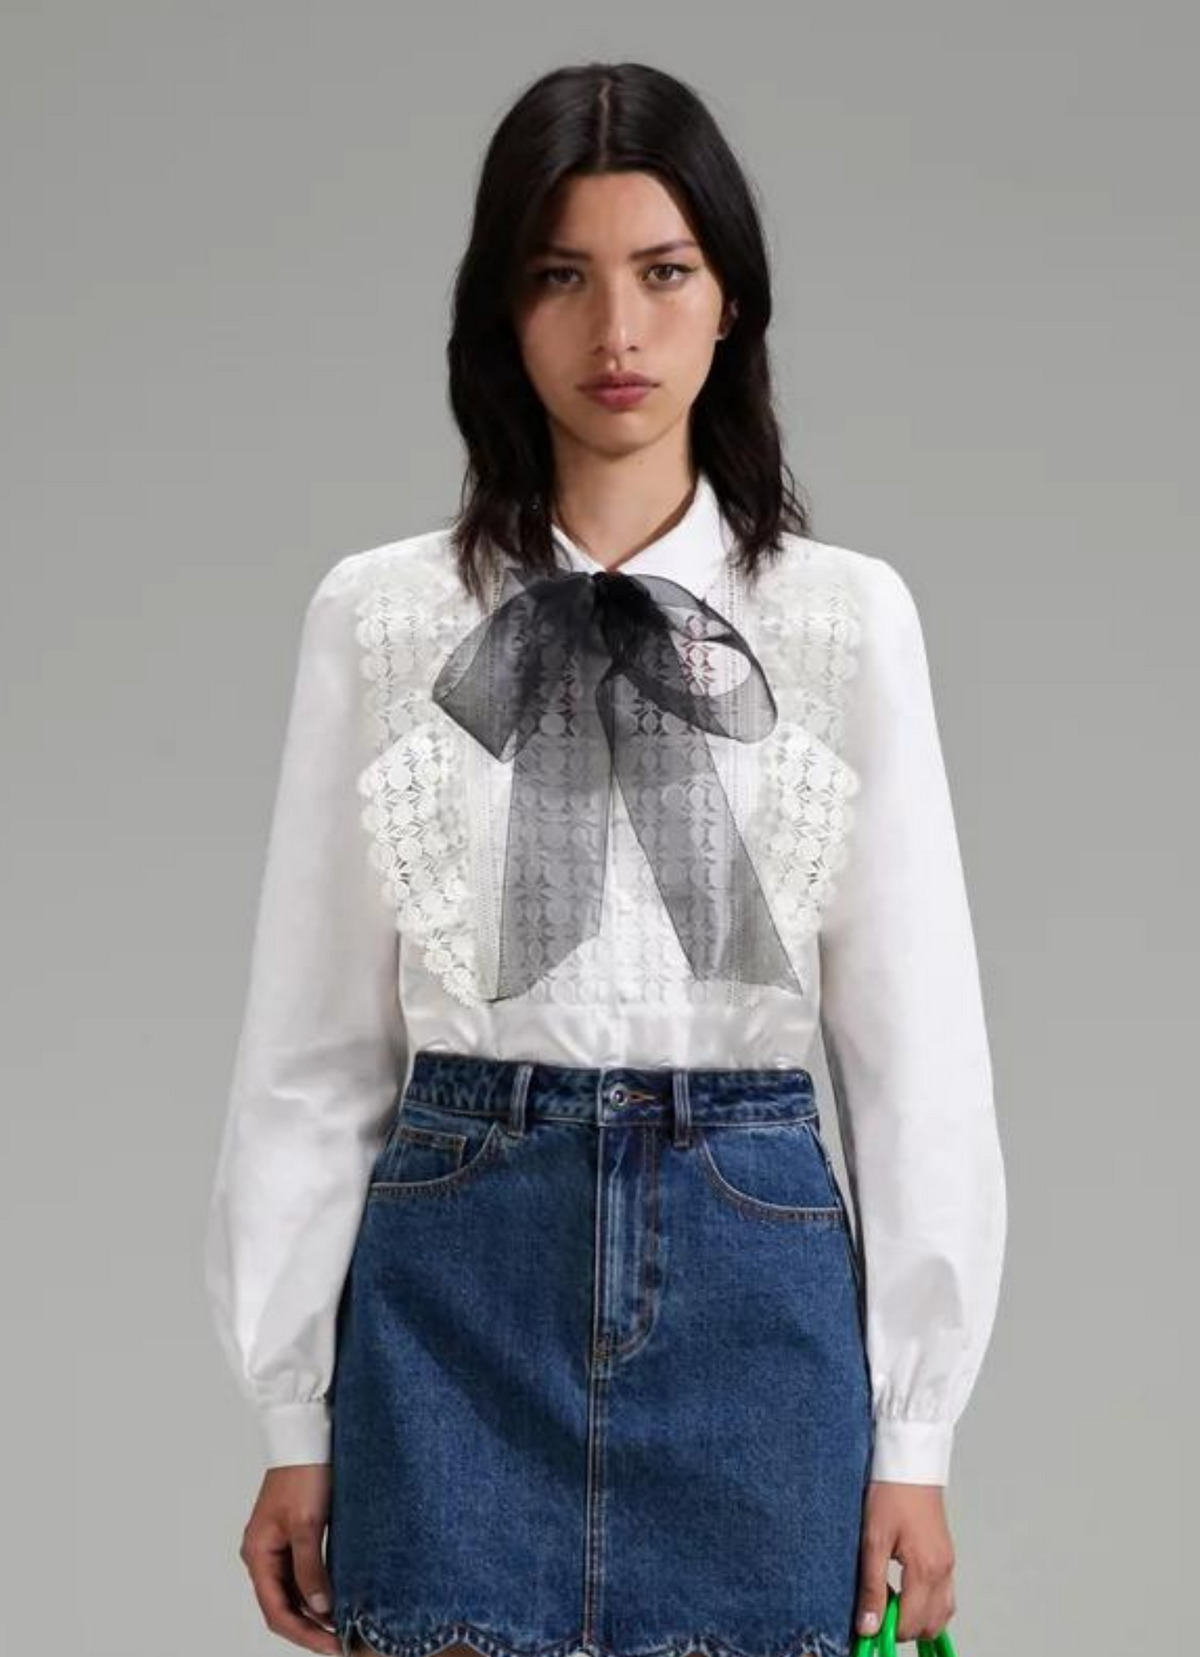 White cotton poplin shirt with classic collar lace ruffles on bodice and long sleeves with detachable black chiffon bow